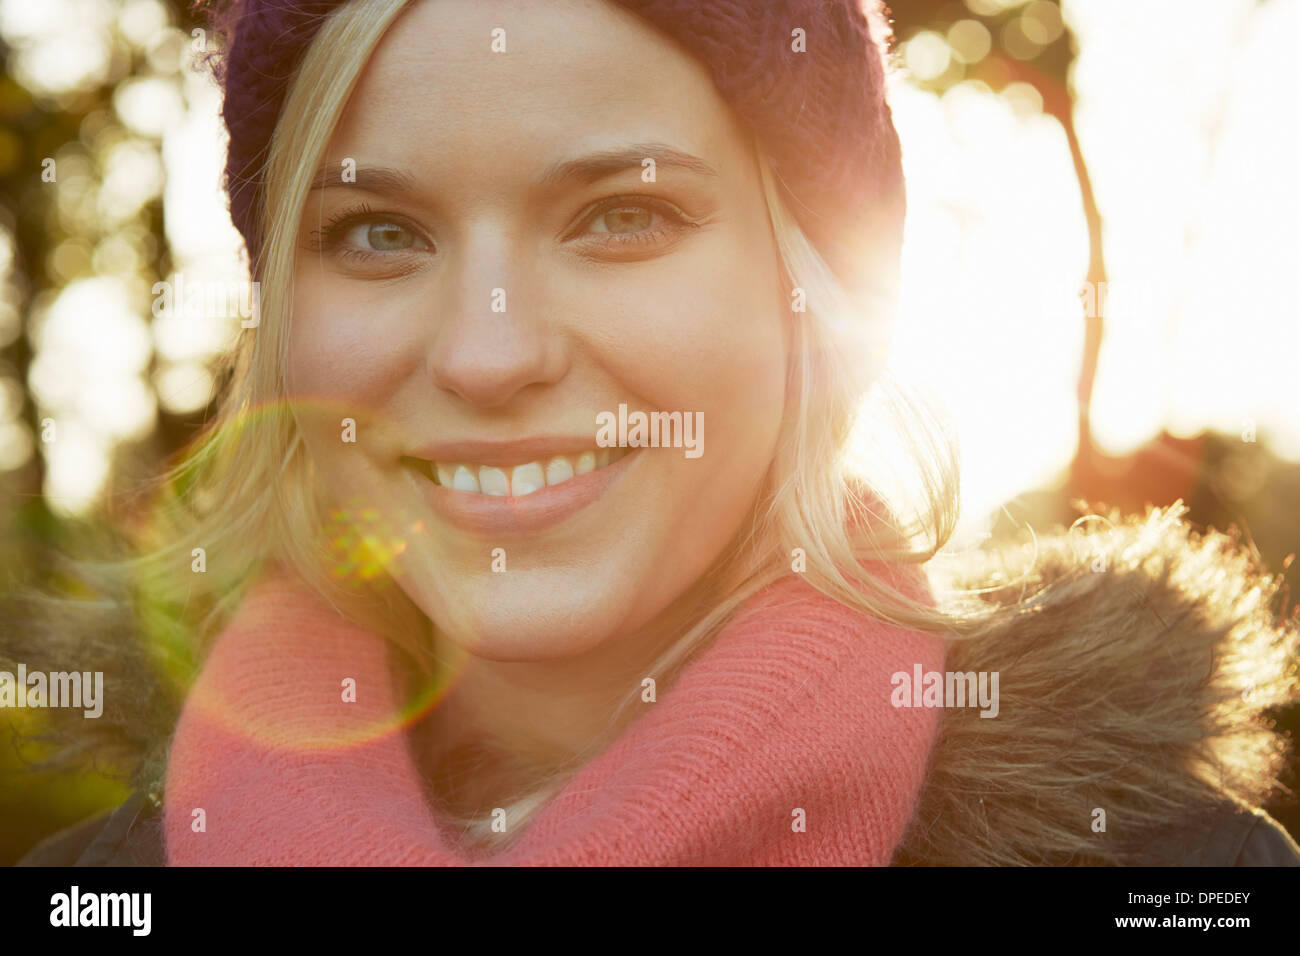 Portrait of young woman in park, wearing knit hat and scarf Stock Photo